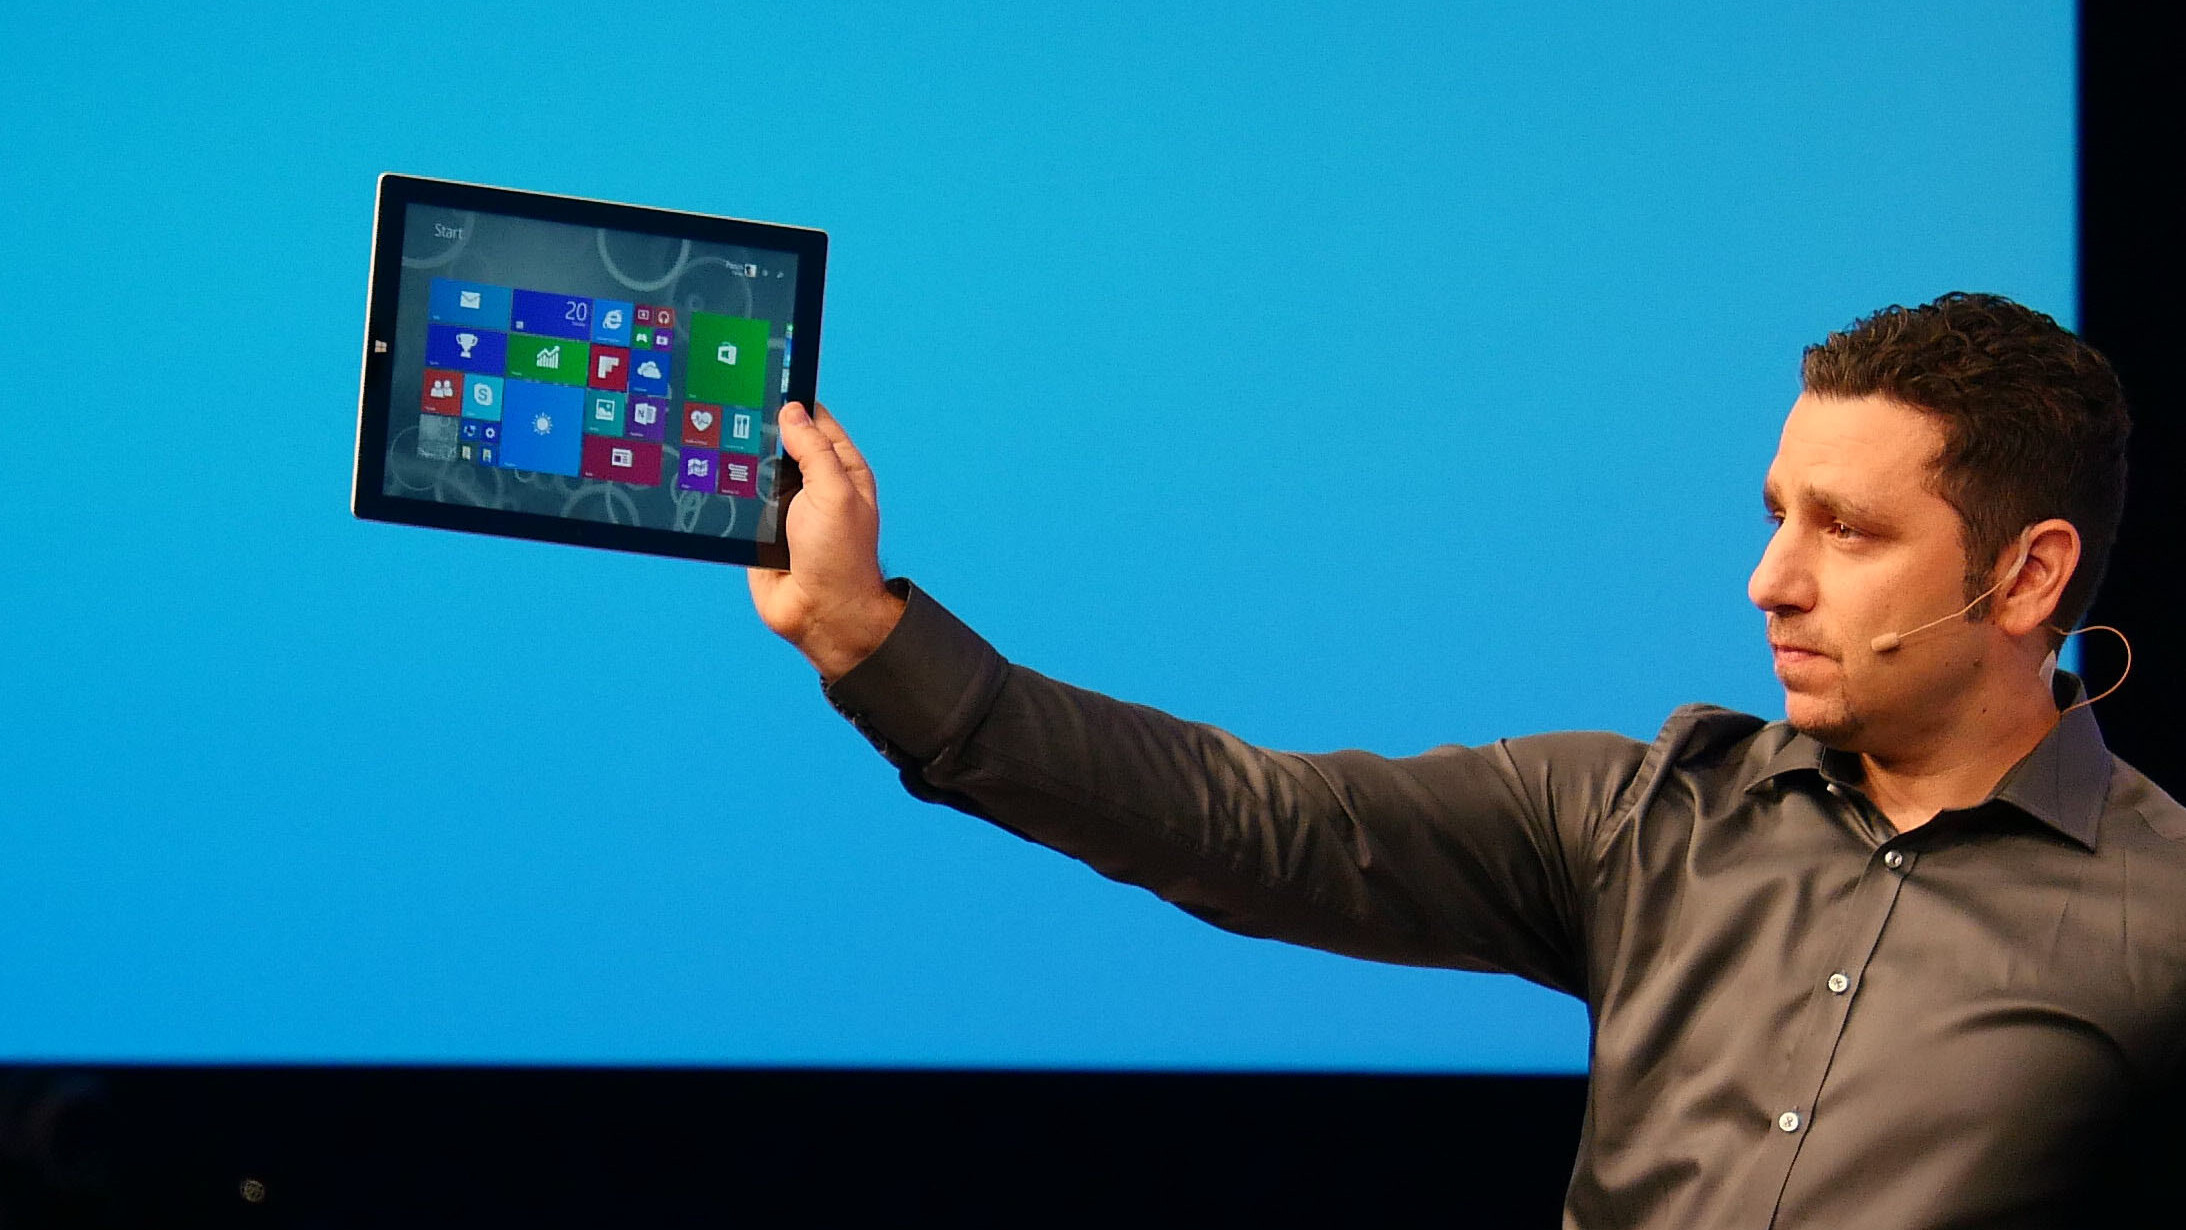 Microsoft unveils new Type Cover for Surface Pro 3: 63% larger trackpad and magnetic sealing mode